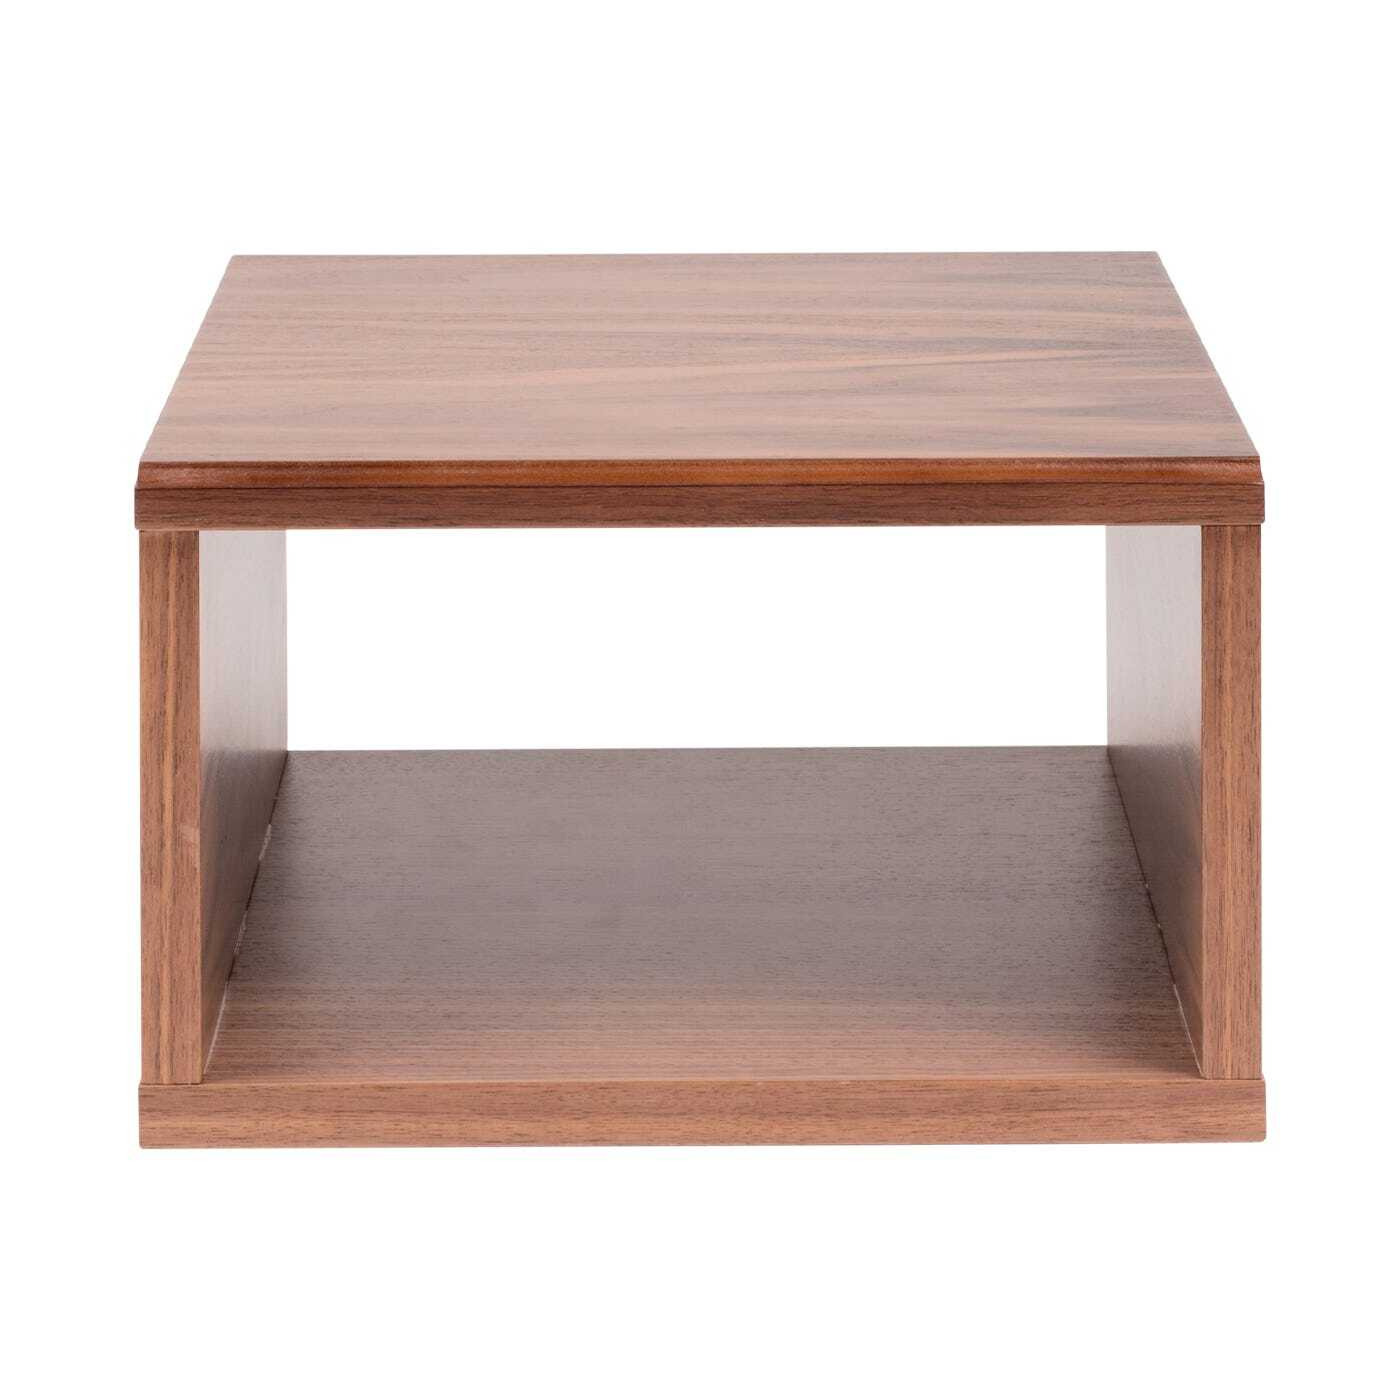 Heal's Tower Shelving System Small Box in Walnut